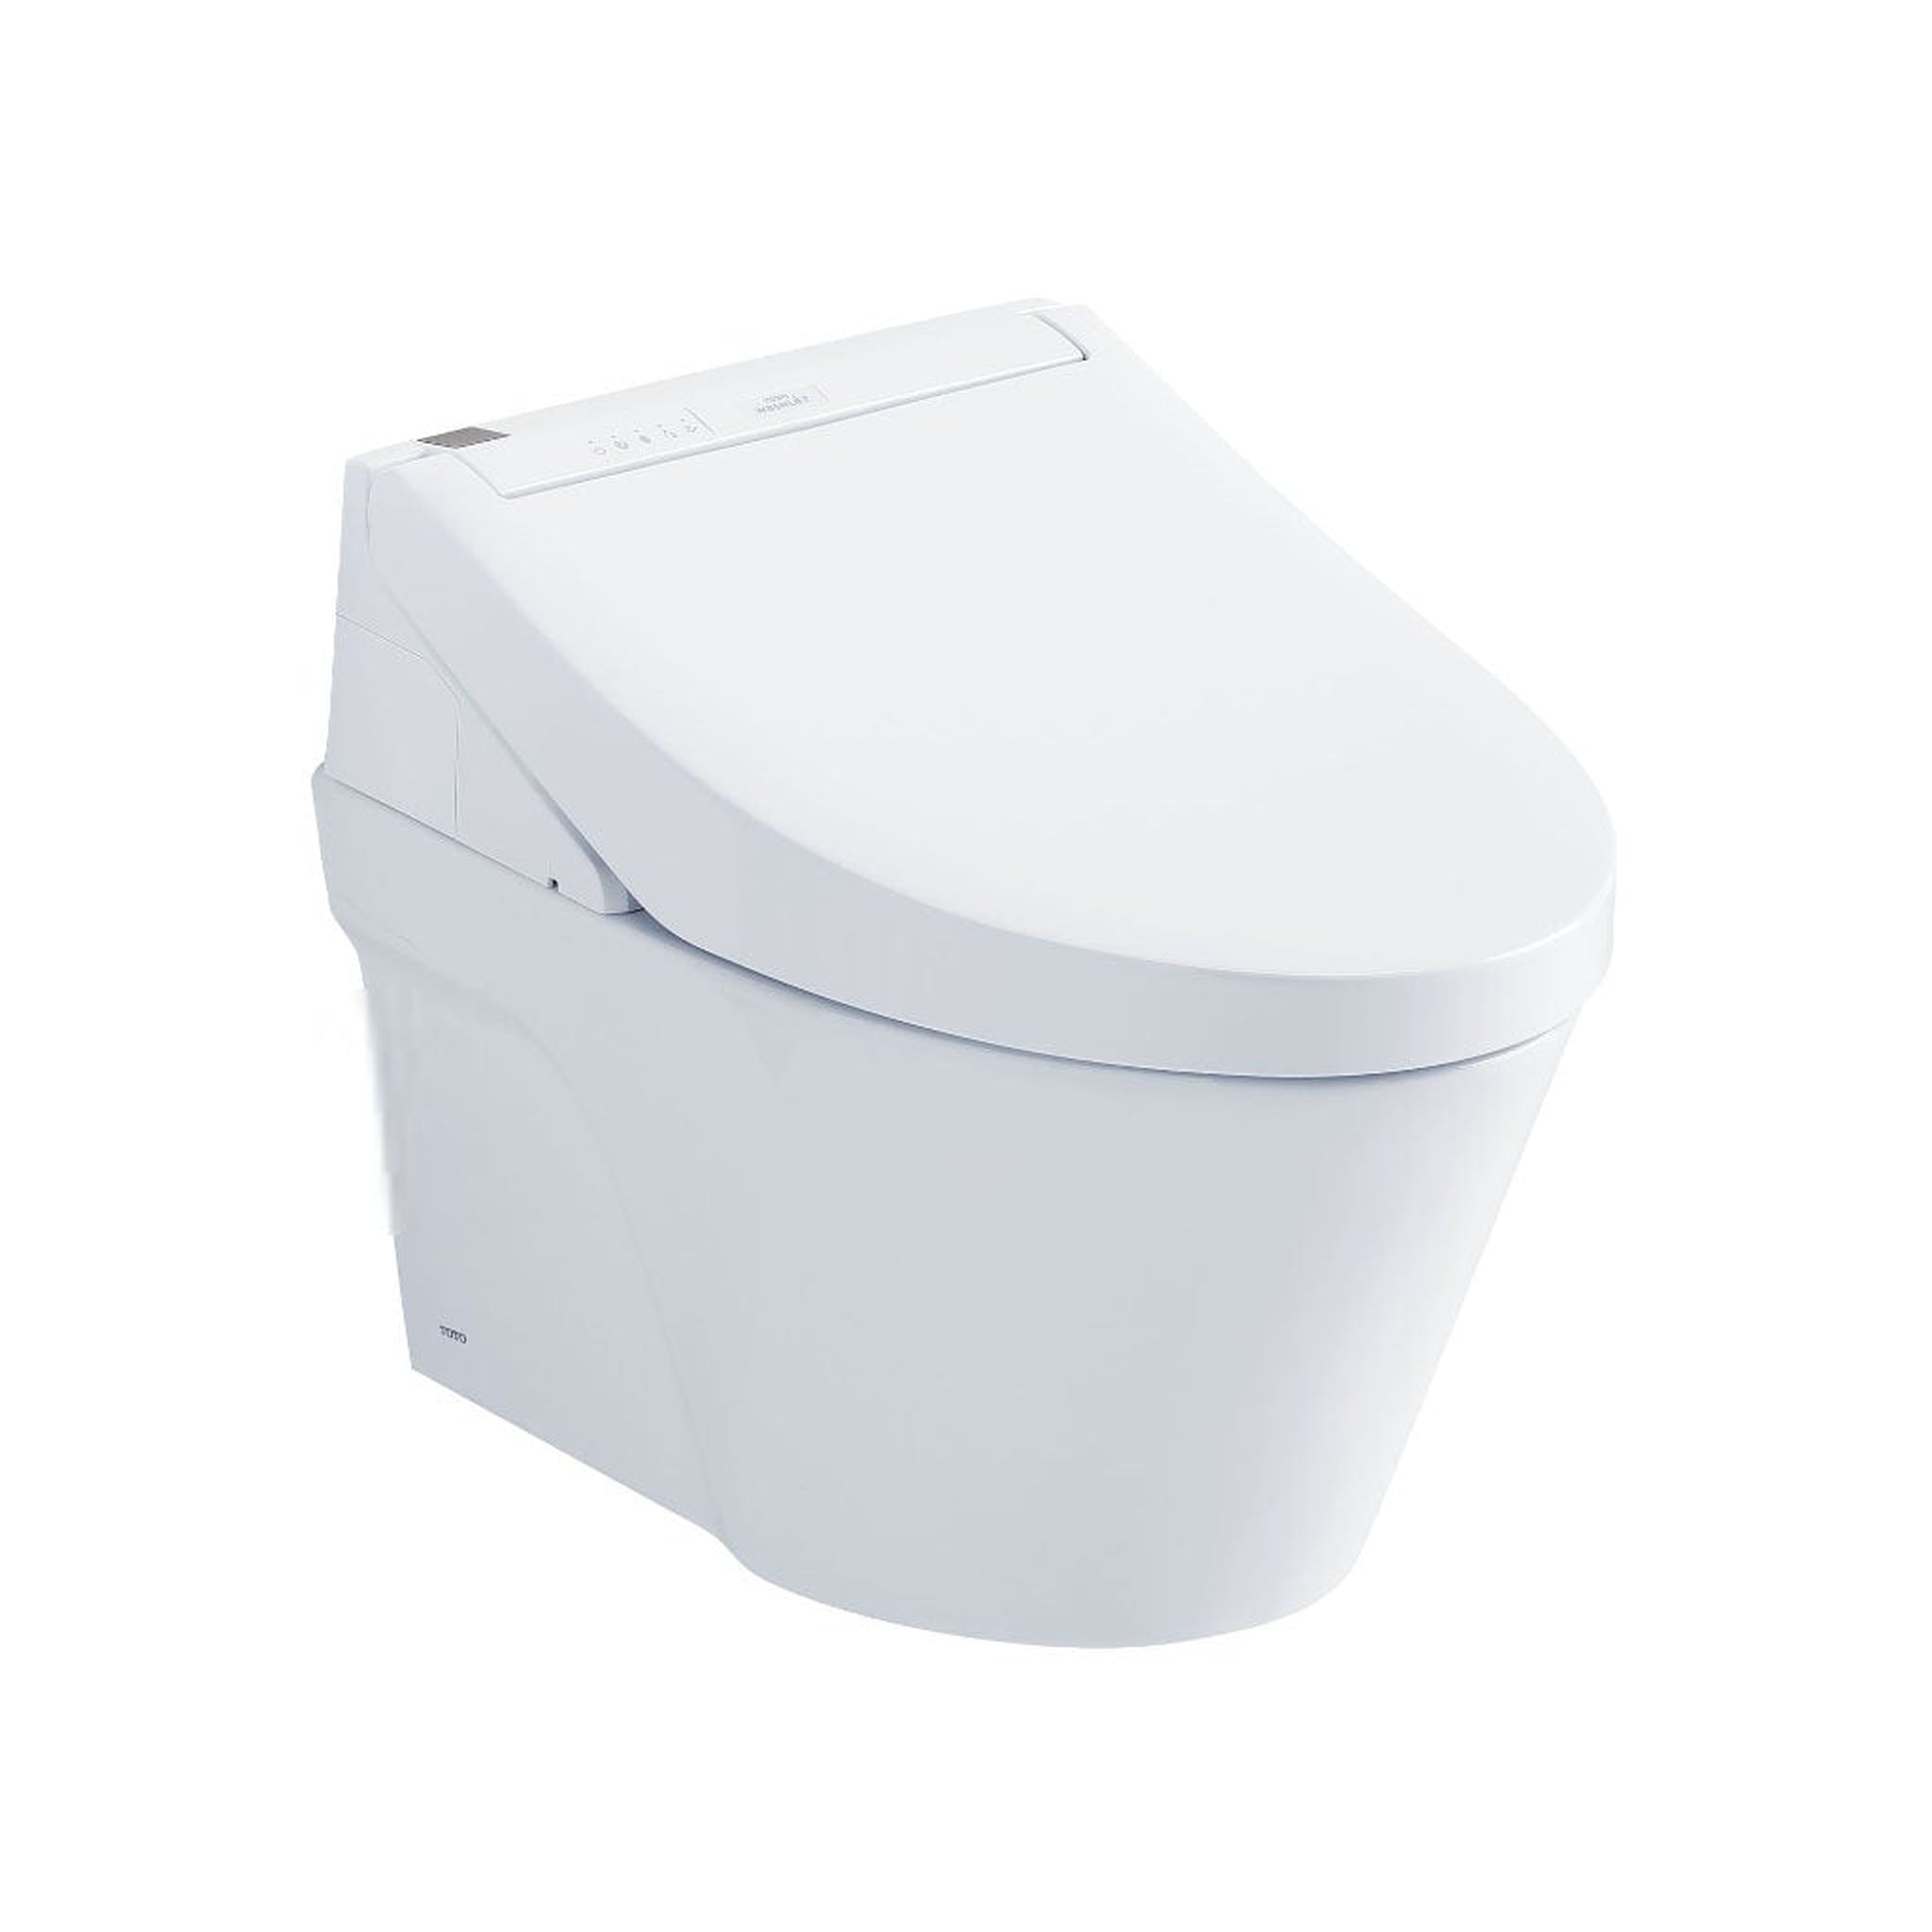 TOTO AP White Elongated Wall-Mounted 1.28 GPF u0026 0.9 GPF Dual-Flush Toilet  With Washlet+ C5 and Matte Silver Push Plate